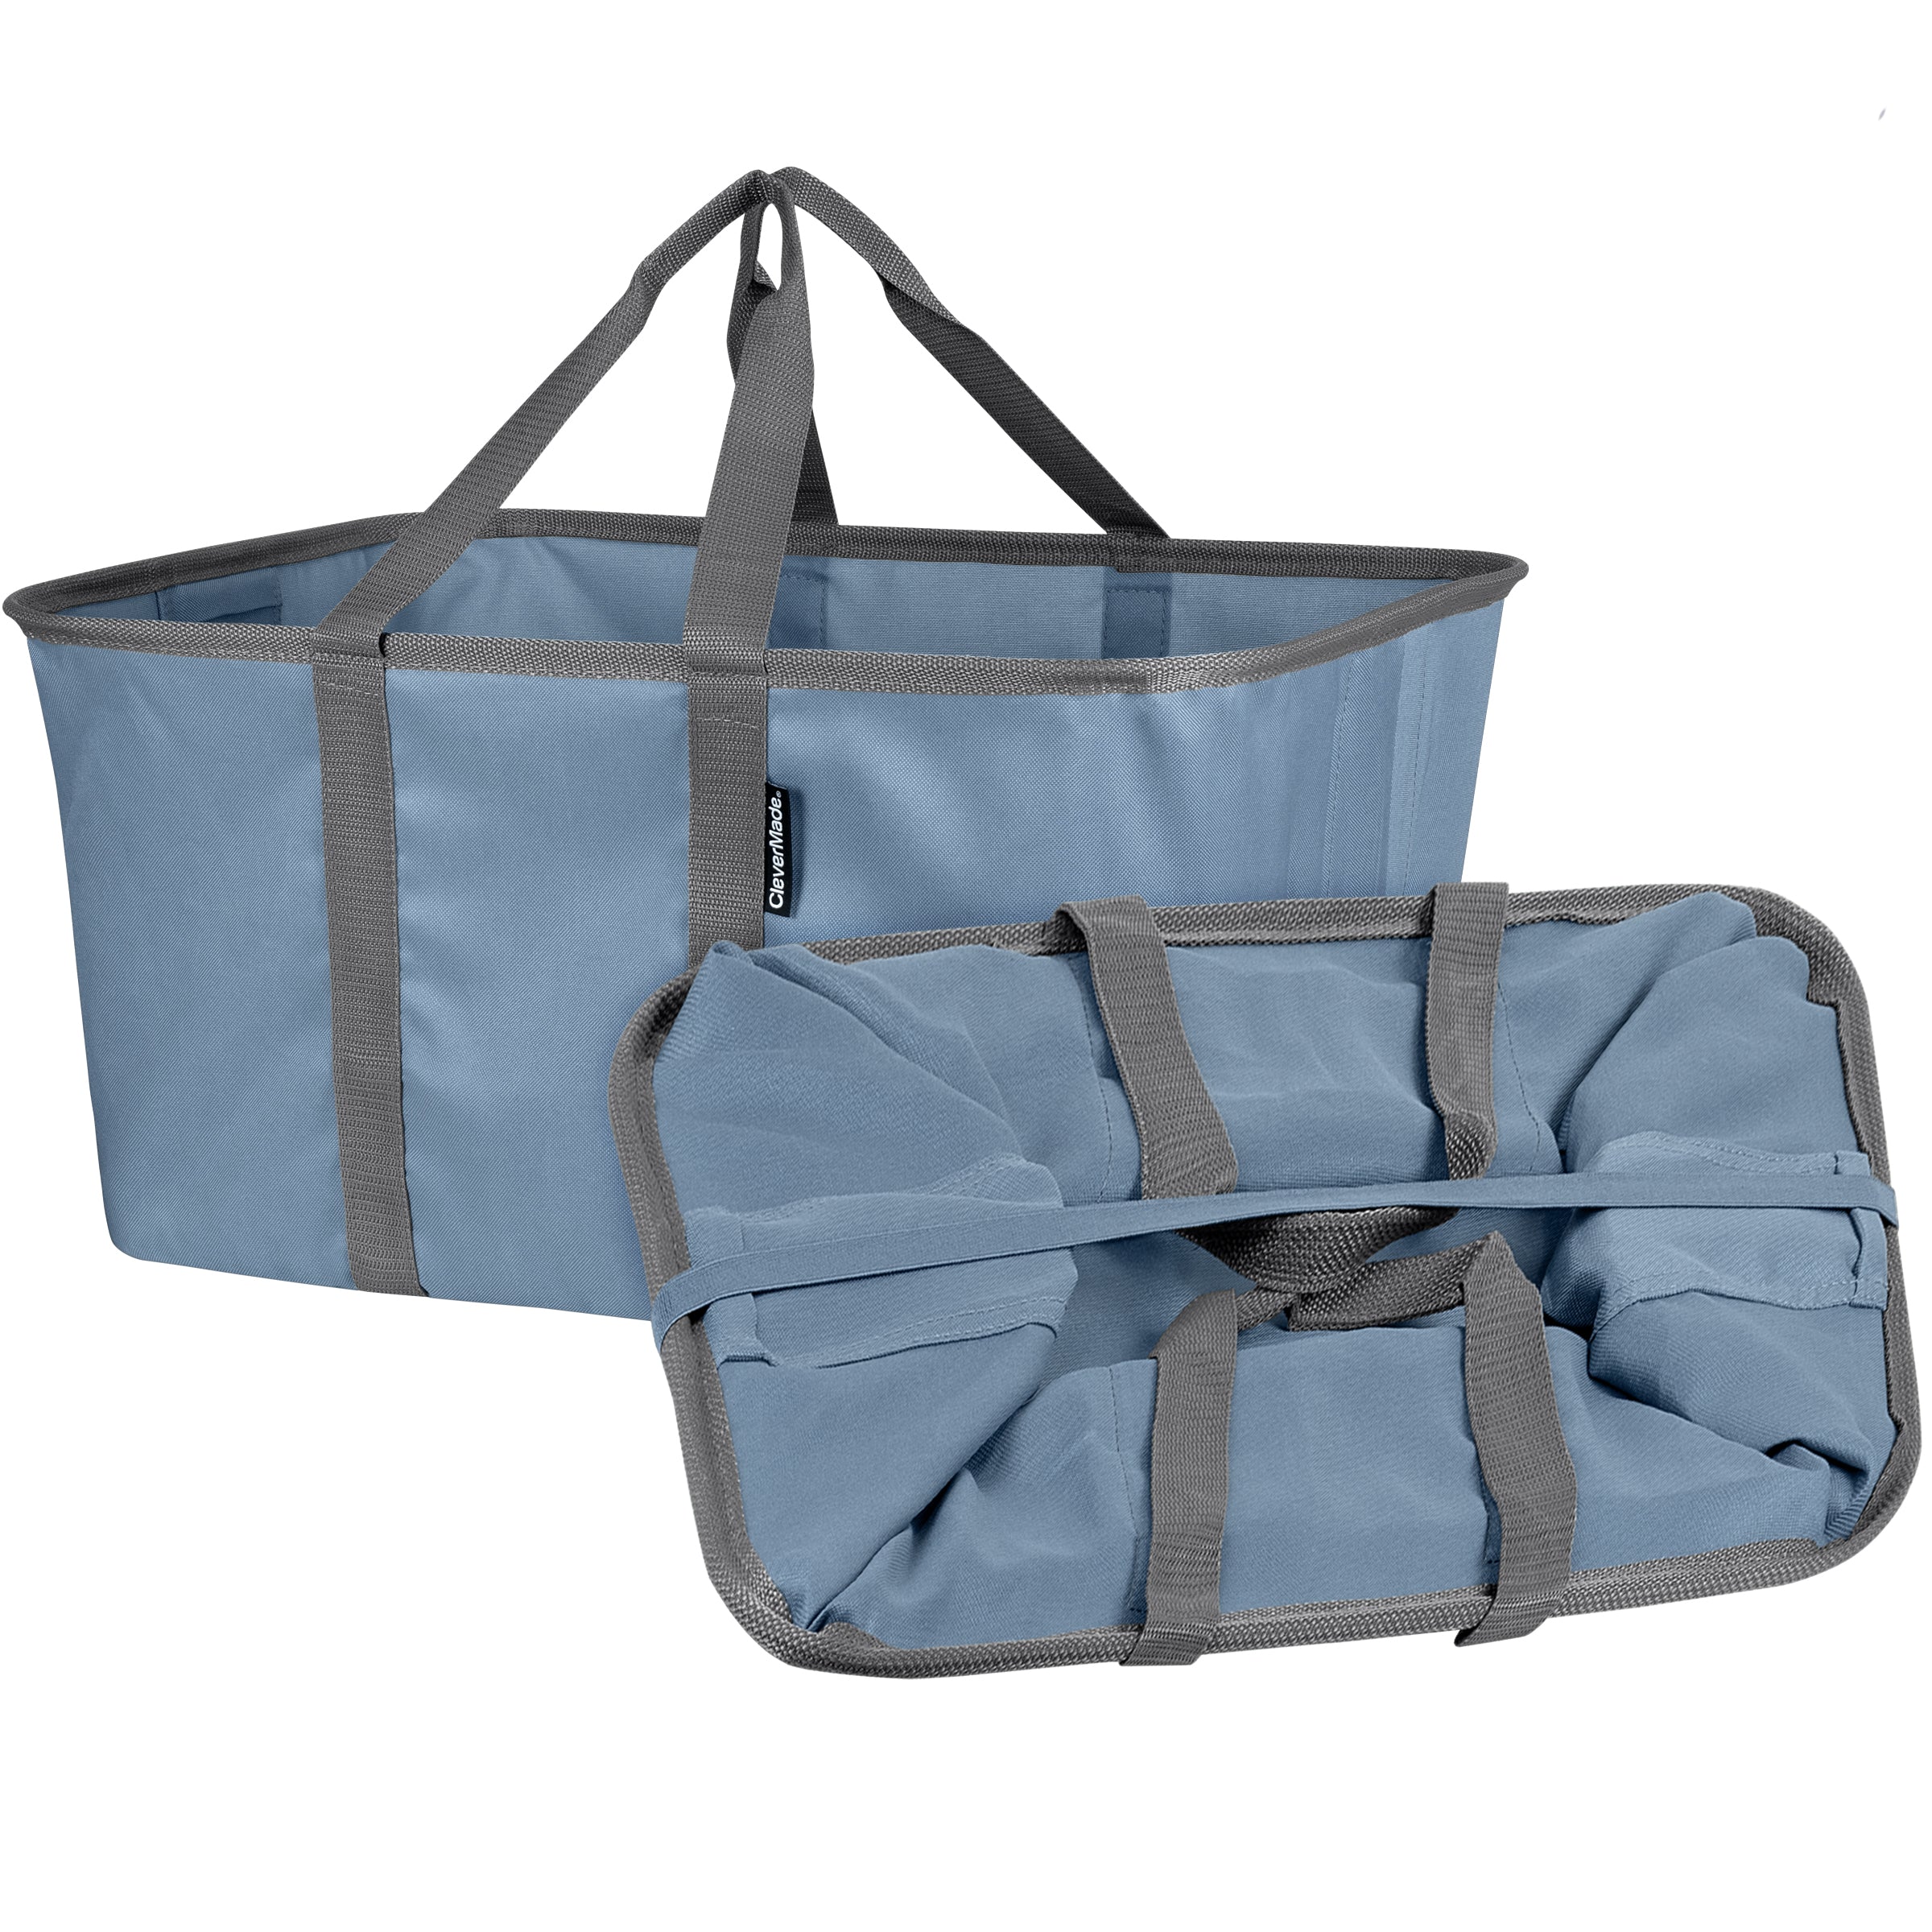 TinkerHome Collapsible Laundry Basket - 20644358